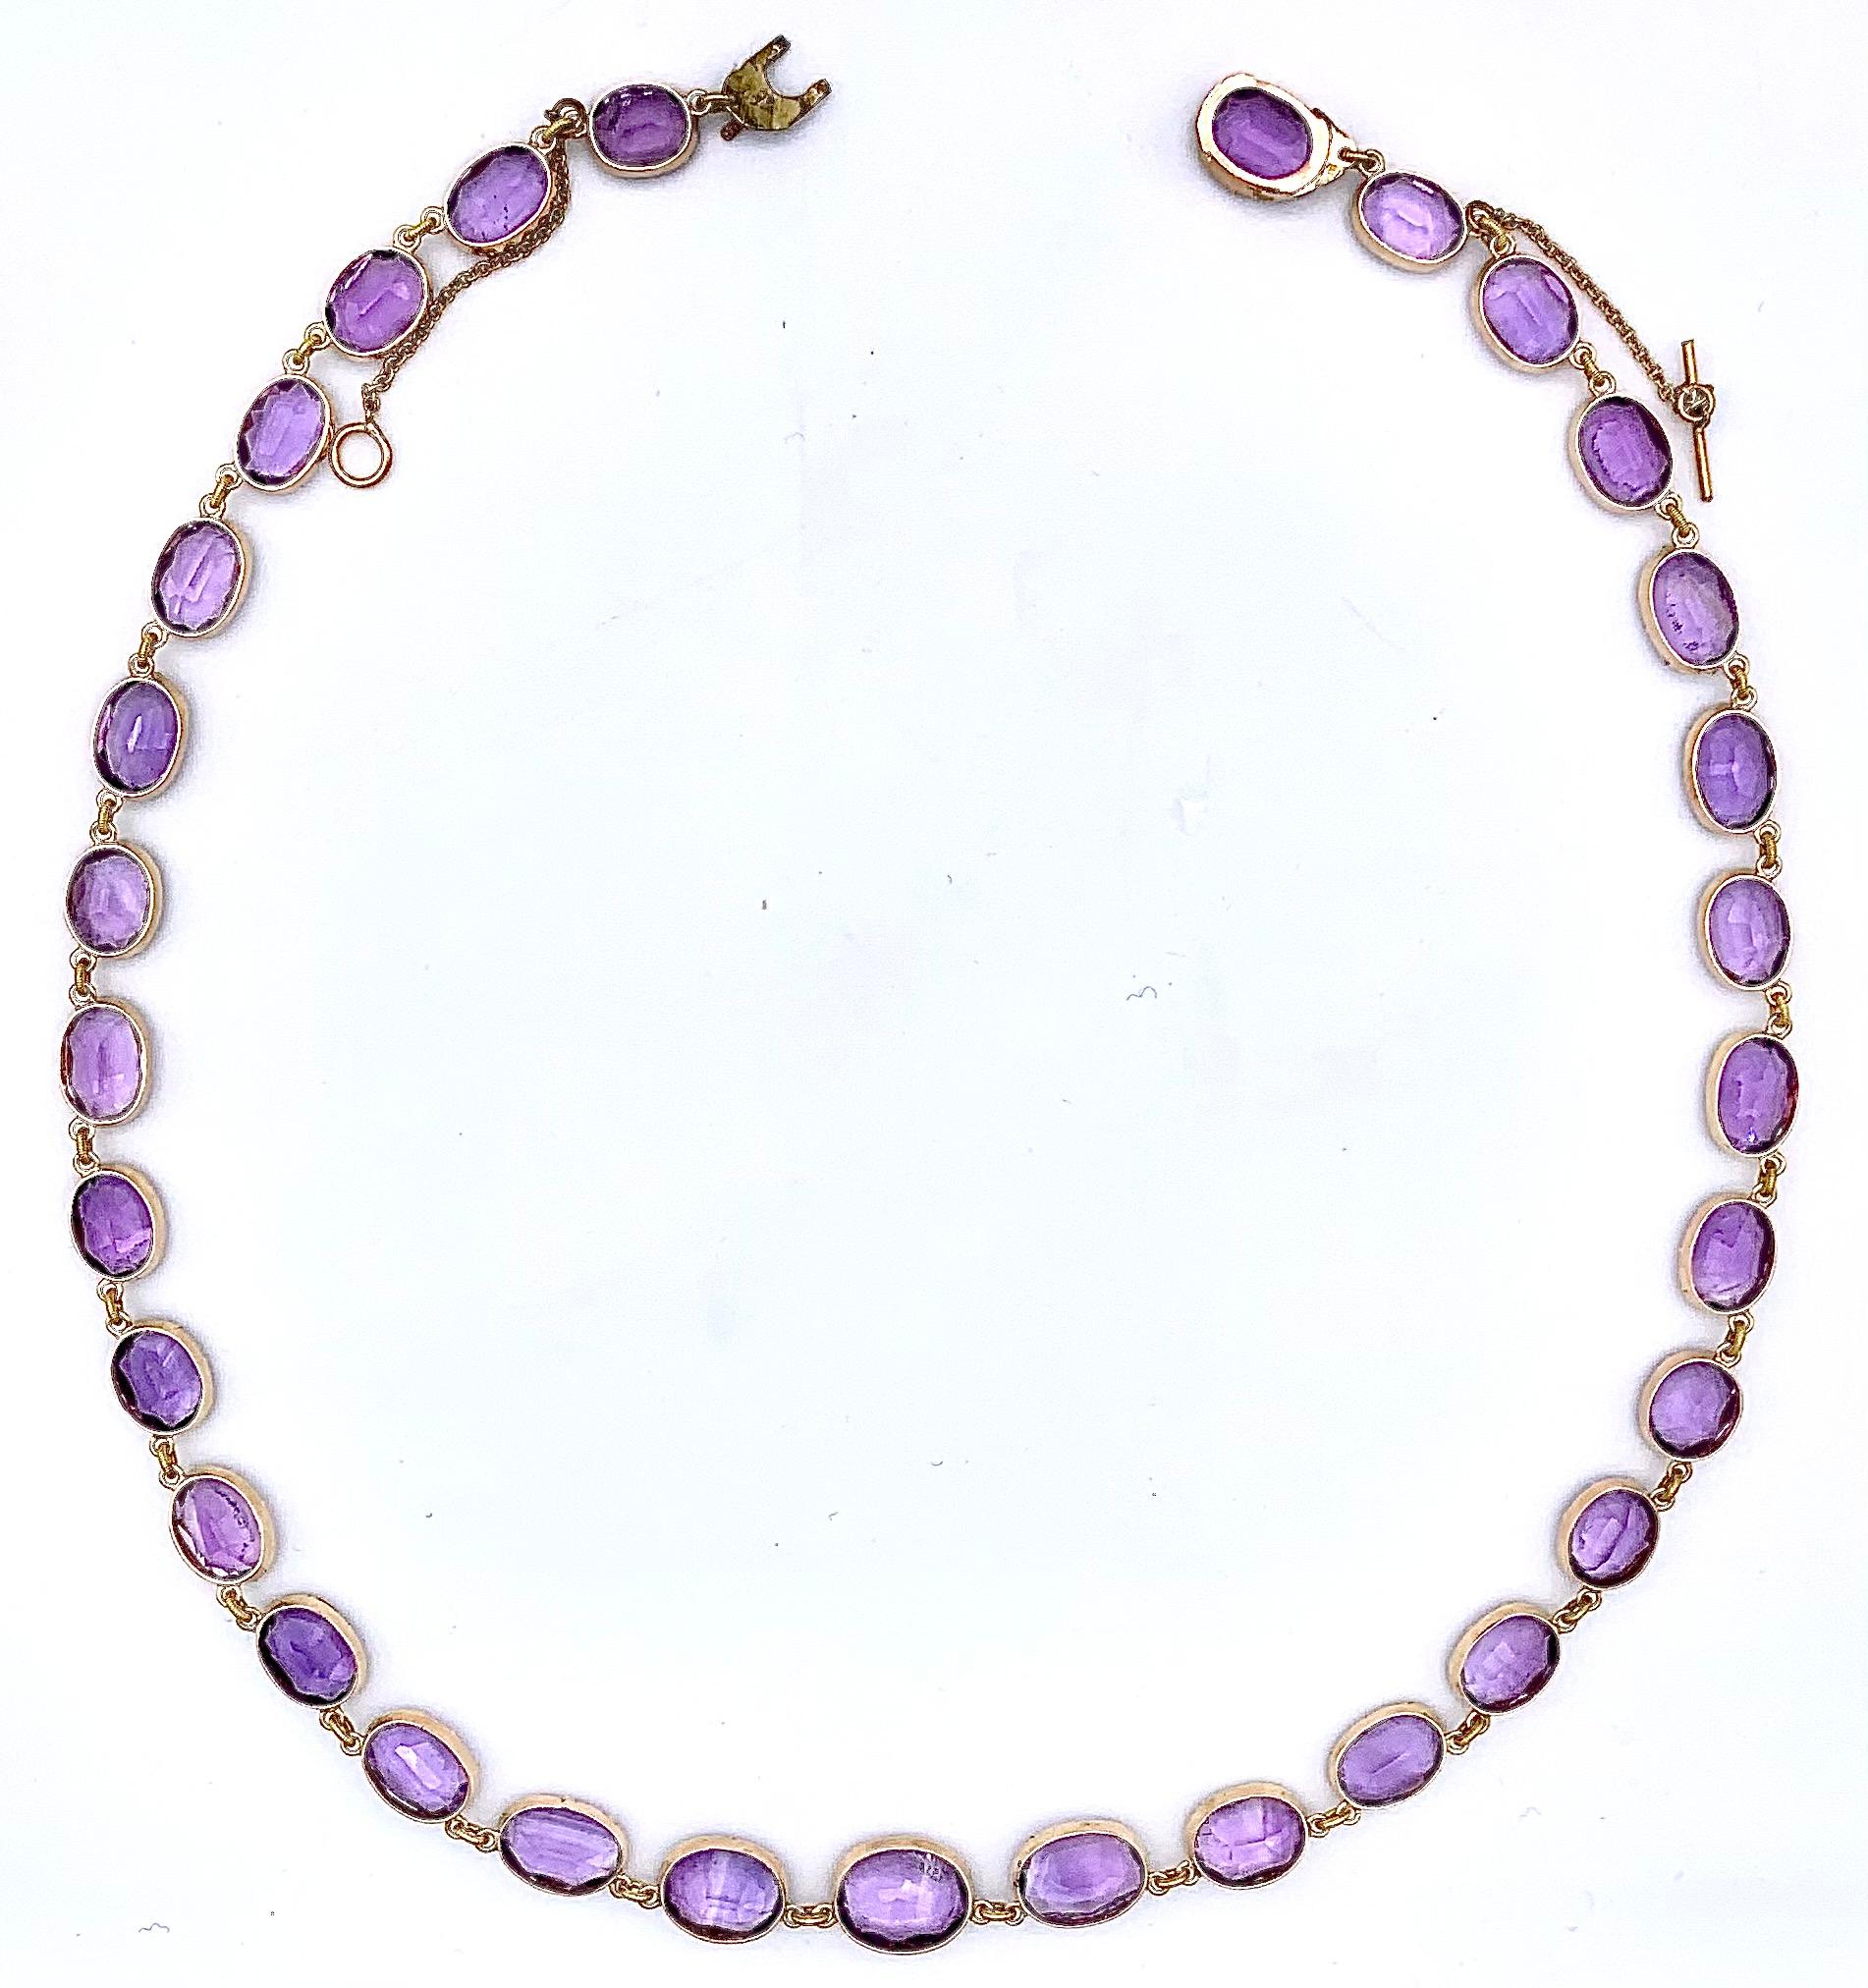 Thirty-one lilac coloured oval facetted amethysts are mounted in 14 karat gold open back settings. One amethyst is mounted as a clasp. The largest amethyst measures 1.2 x 1 cm.

The necklace comes with 4 amethysts in identical settings, they could